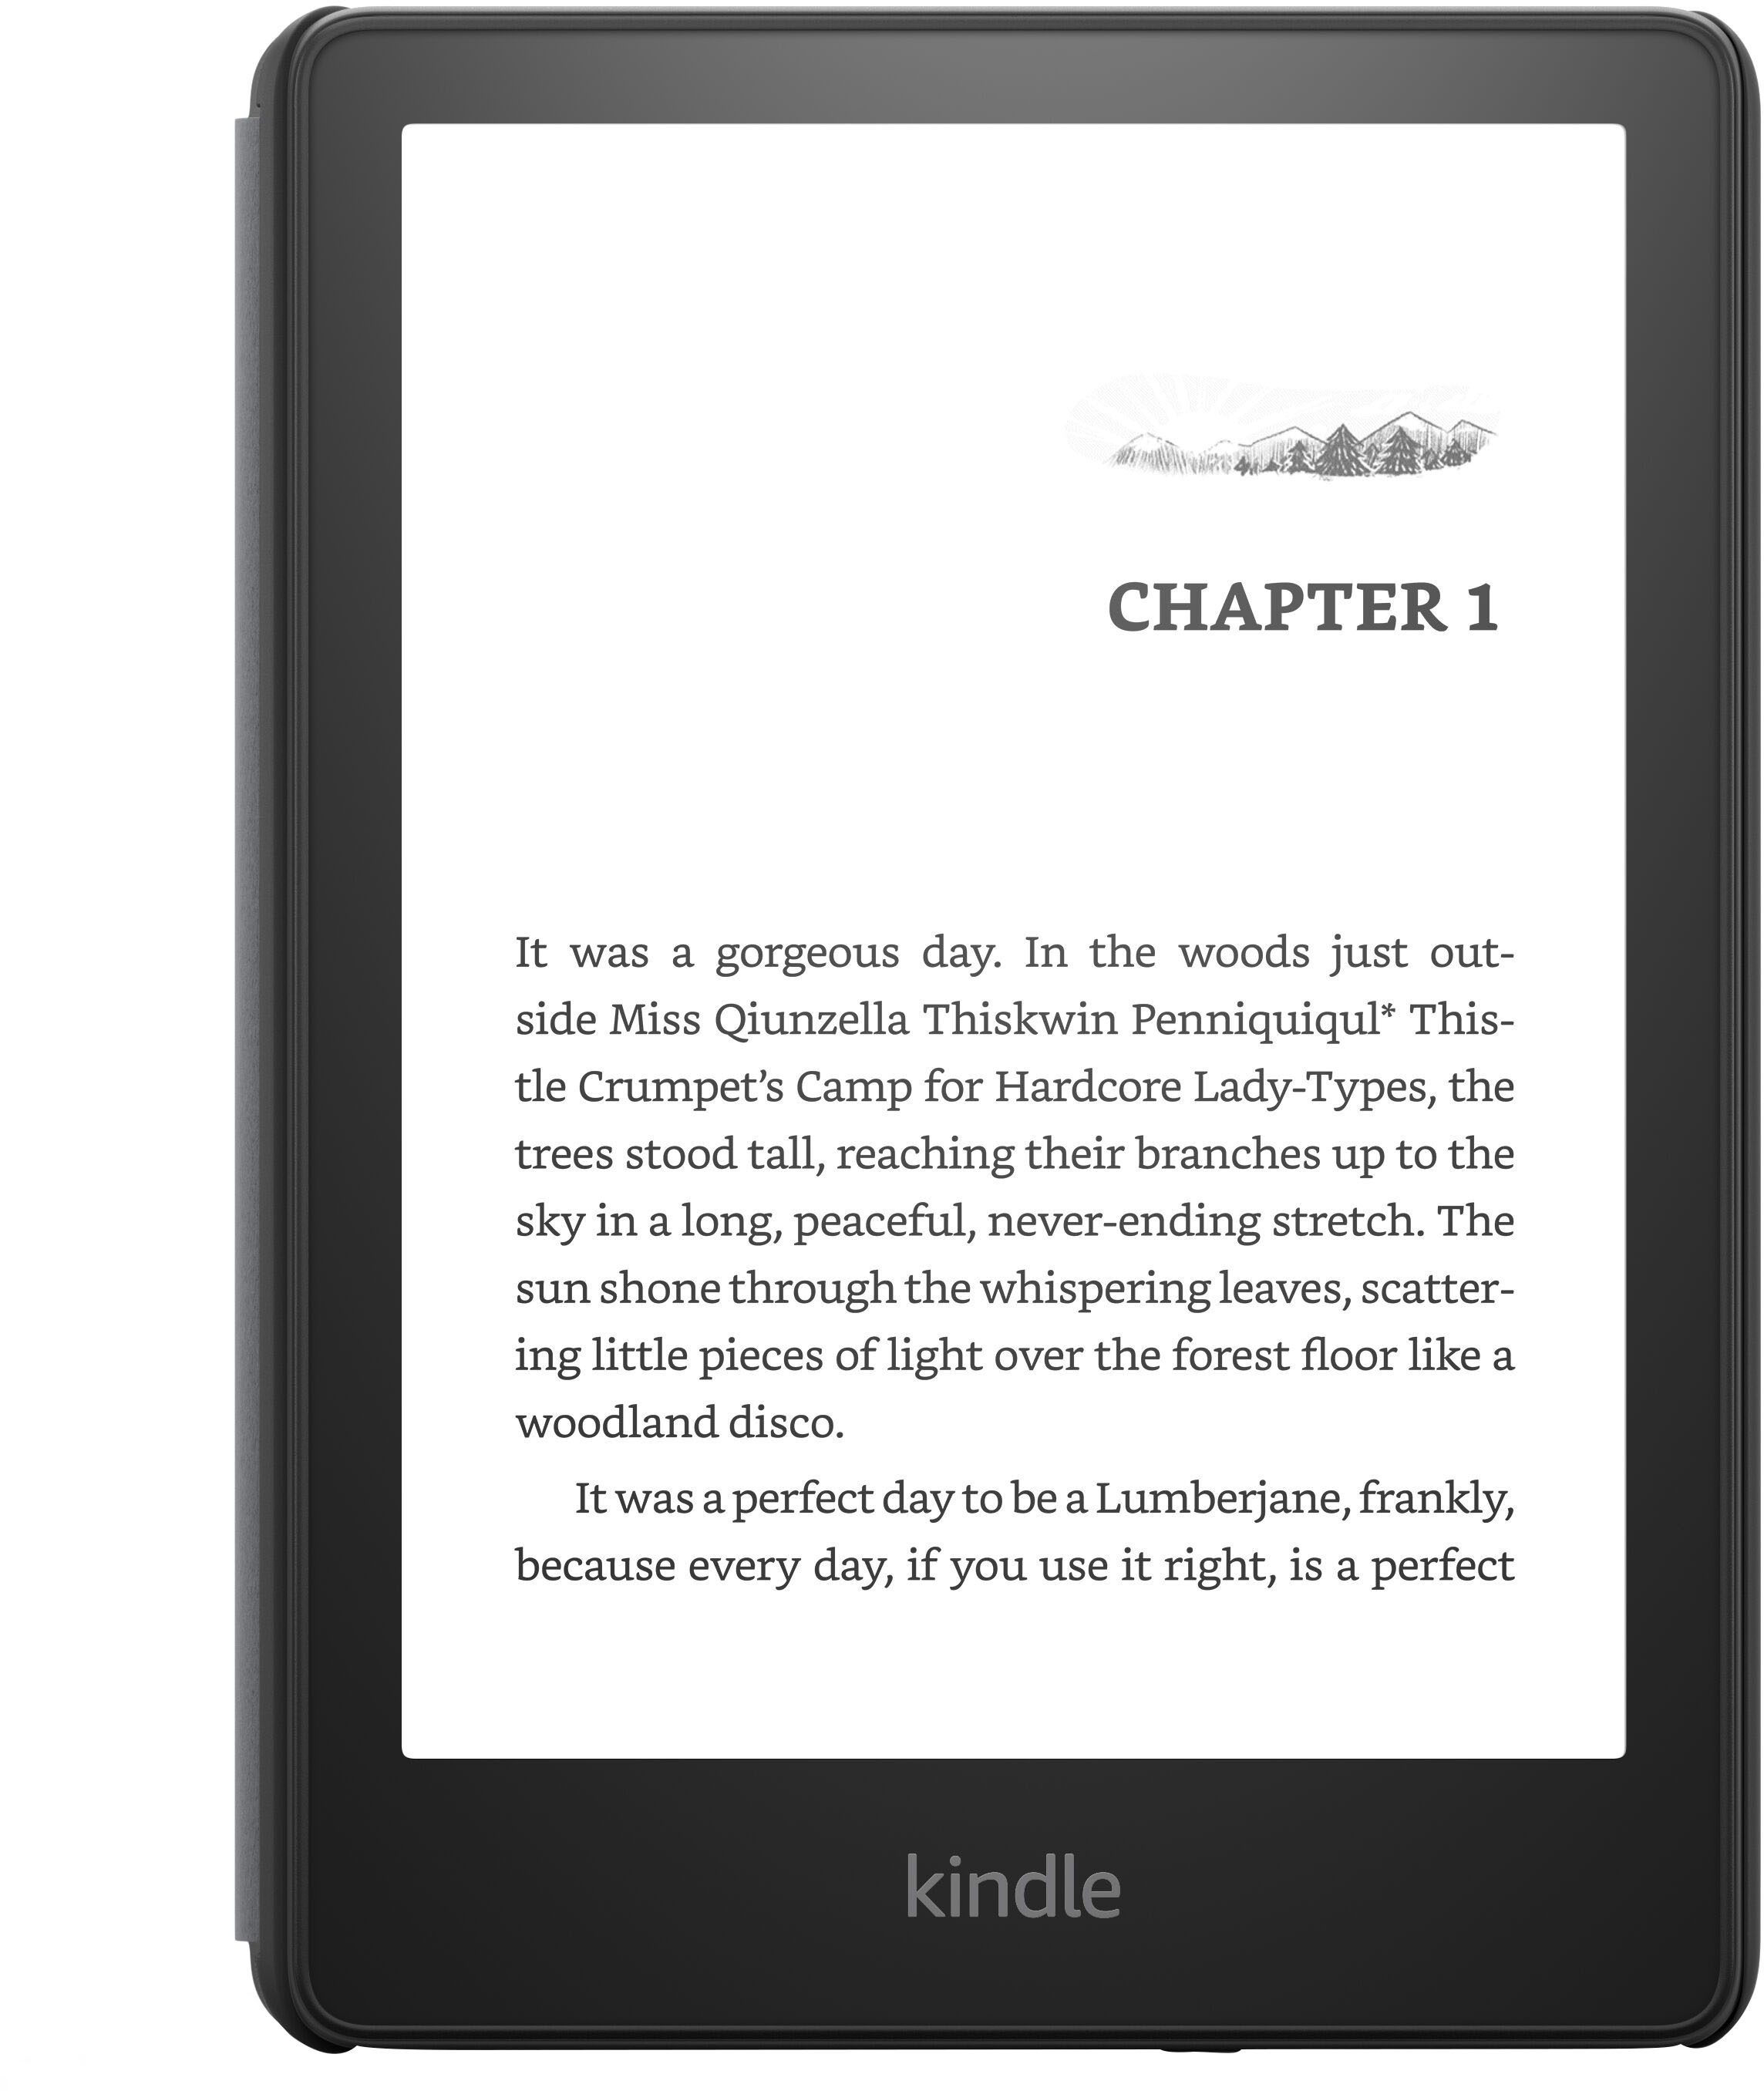 2021 Kindle Paperwhite review: Why buying a new Kindle is a bit